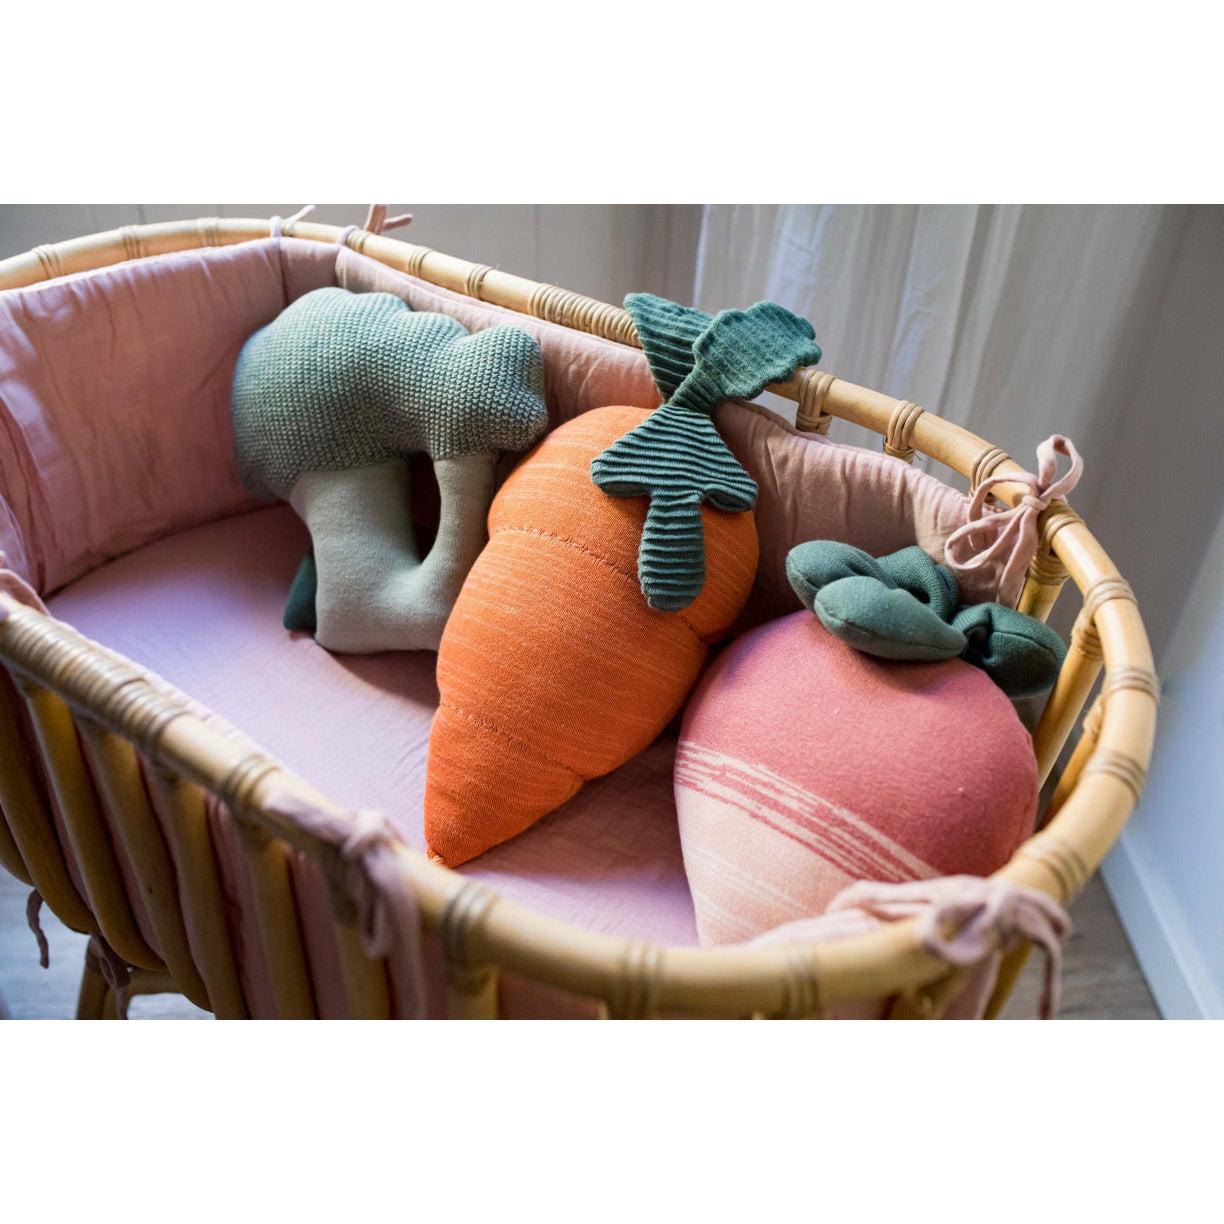 Lorena Canals Oli & Carol Cathy the Carrot Knitted Cushion